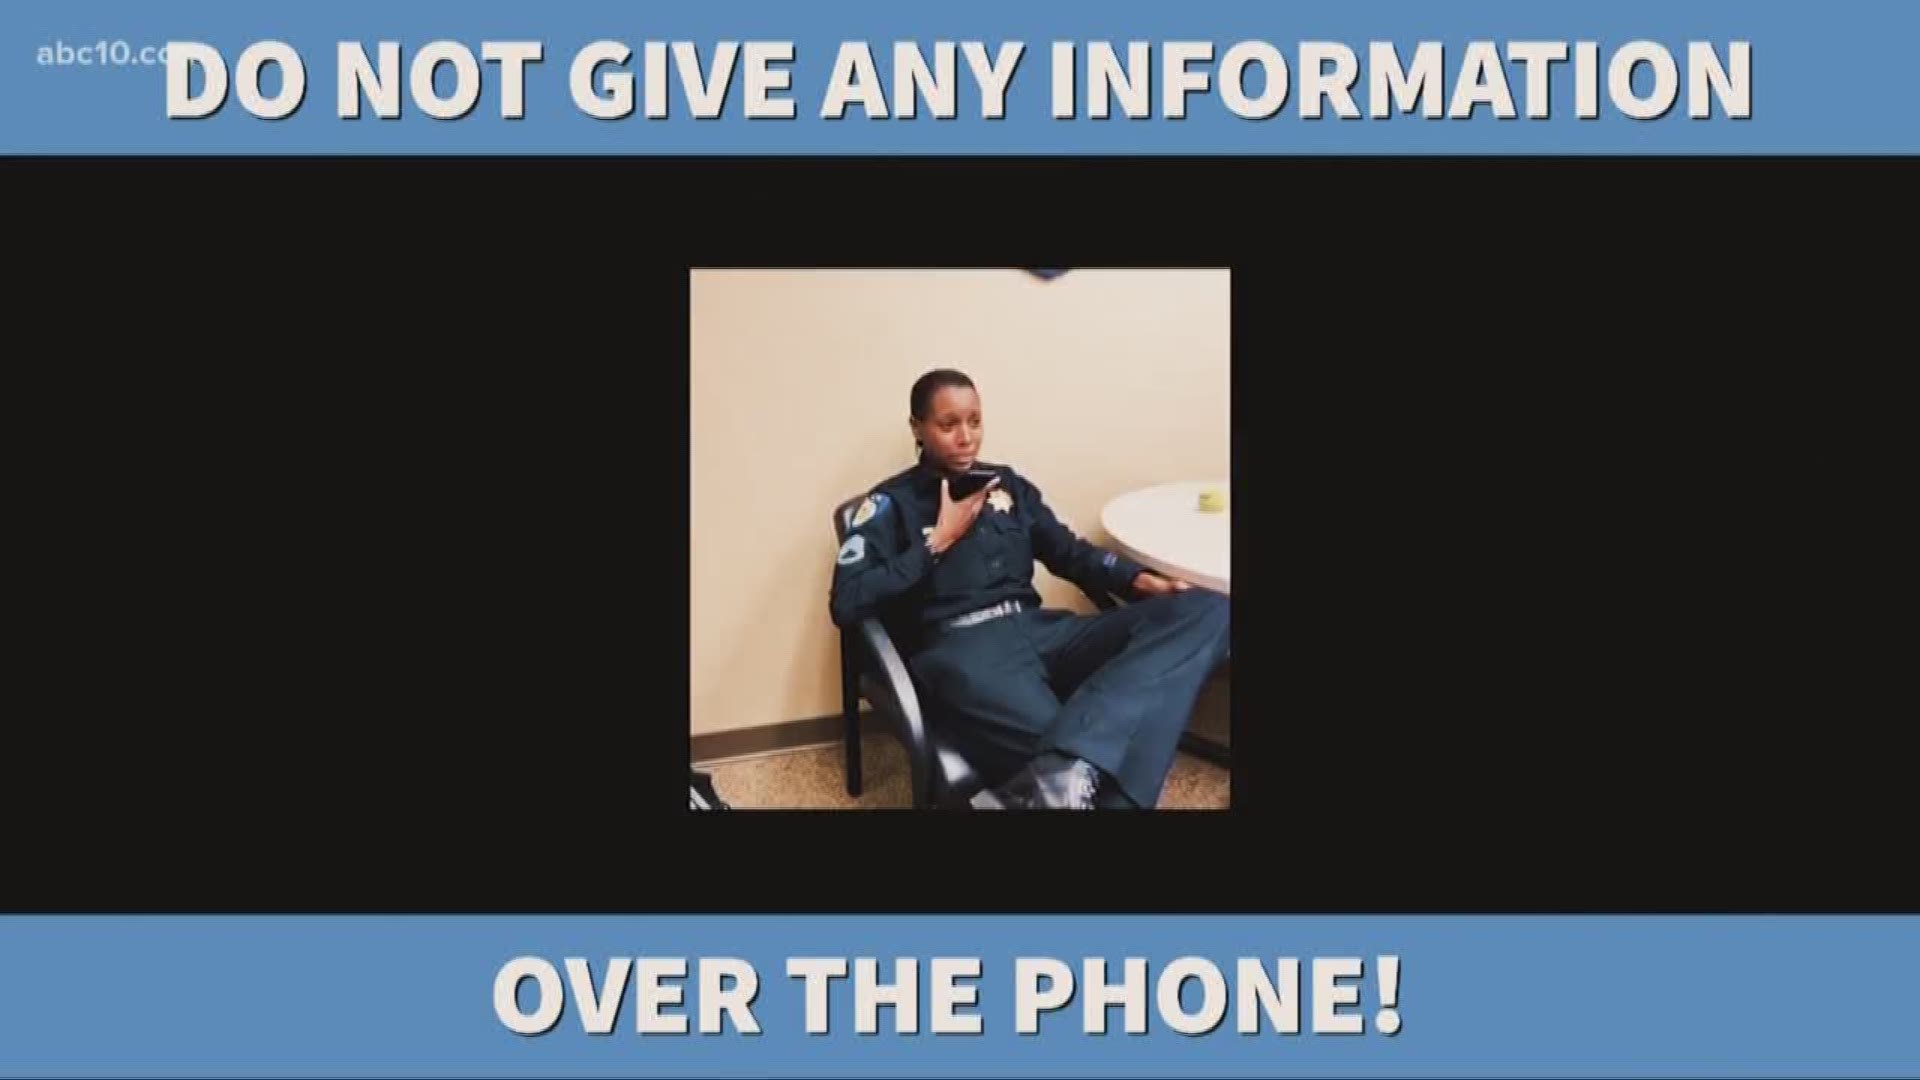 Officer Karl Chan said law enforcement never asks people to verify personal information over the phone.